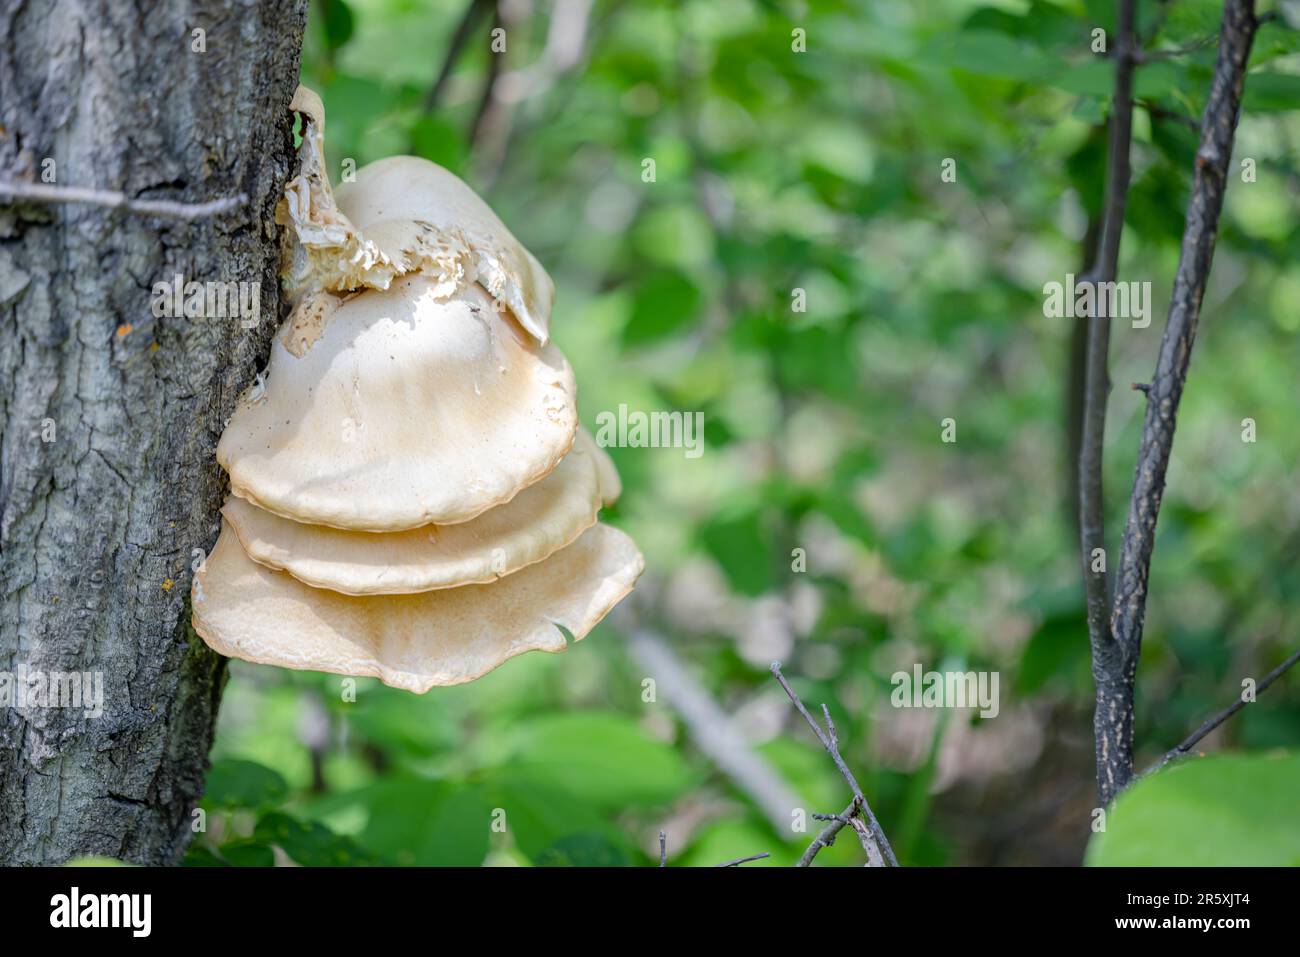 A Pleurotus ostreatus or the oyster a common edible mushroom on a tree. It is one of the more commonly sought wild mushrooms. Stock Photo